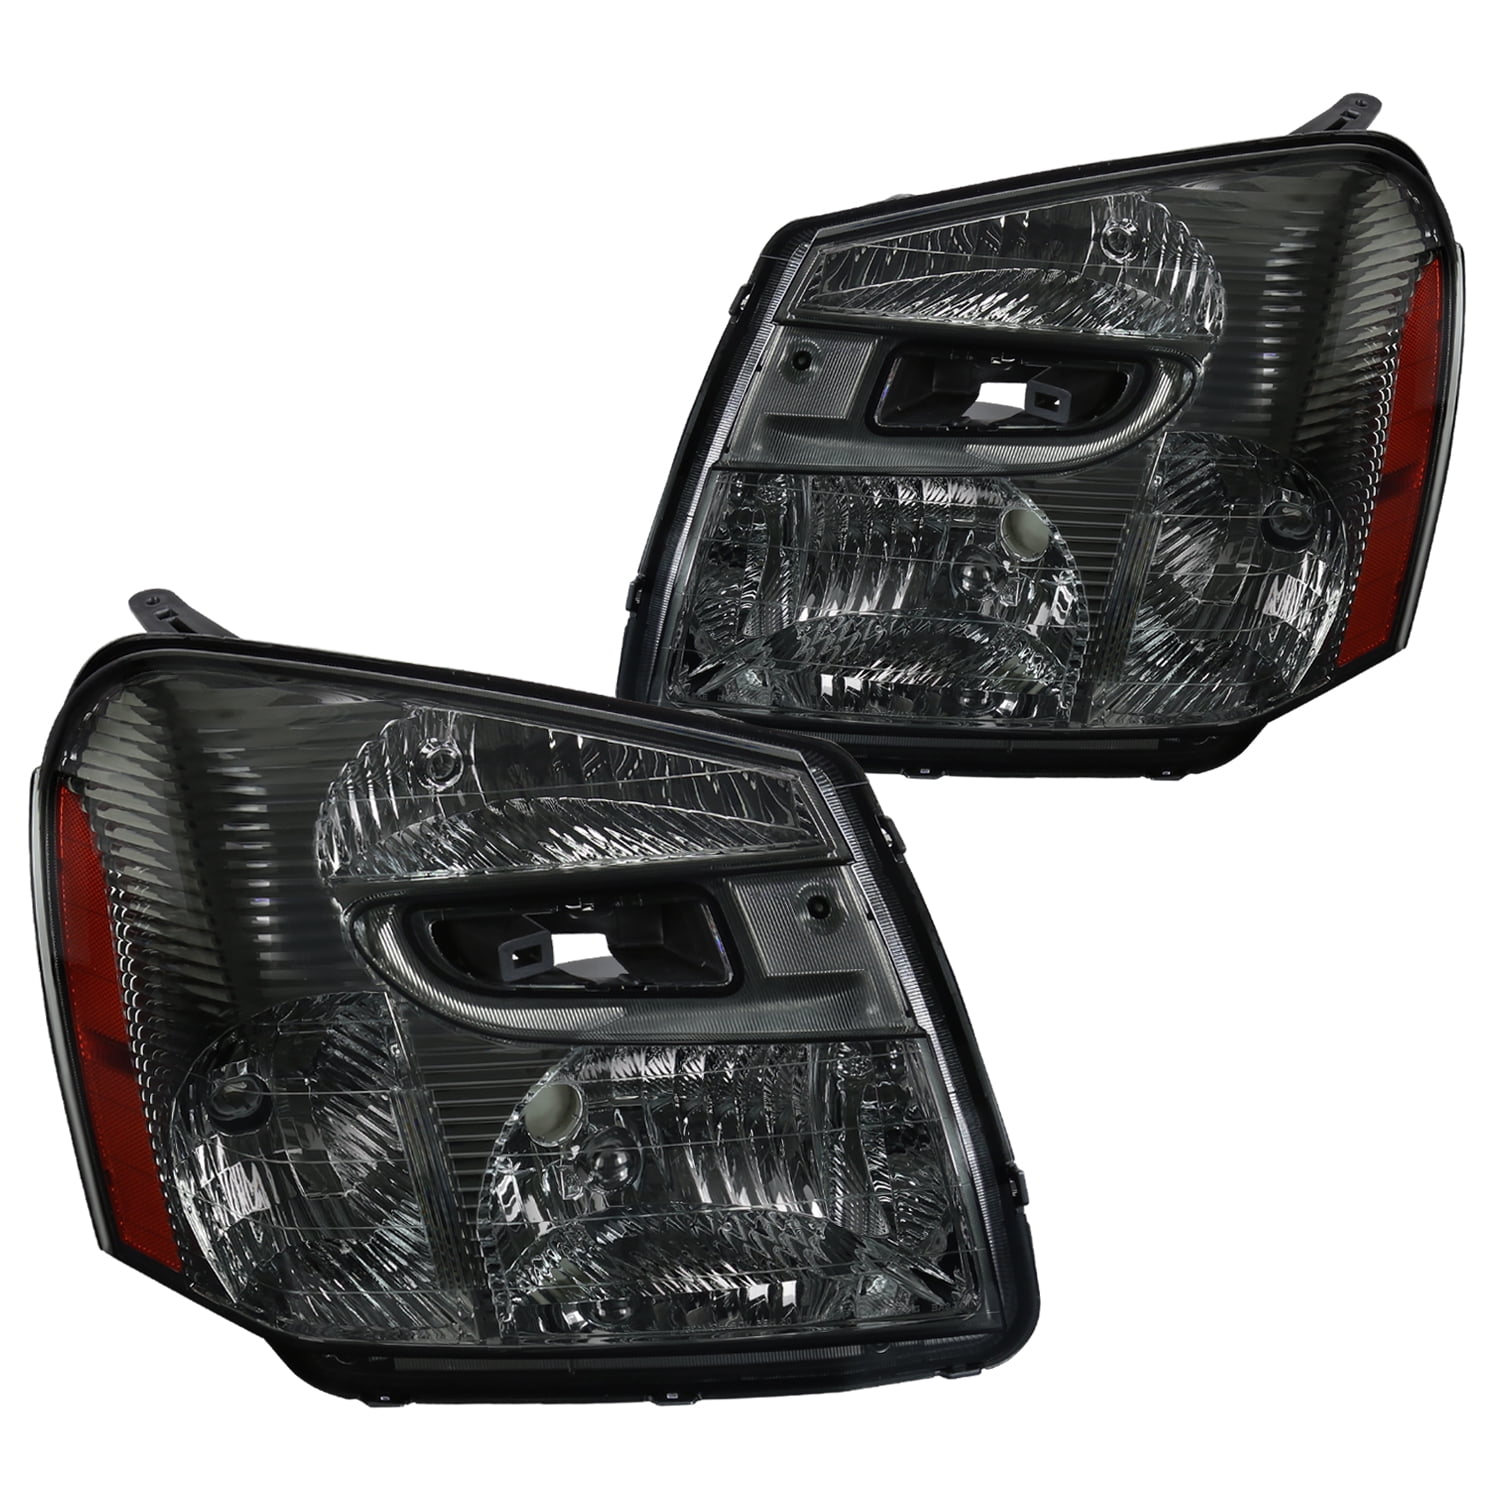 FOR 2005-2009 CHEVY EQUINOX BLACK REPLACEMENT HEADLIGHTS LAMPS W/LED SIGNAL DRL